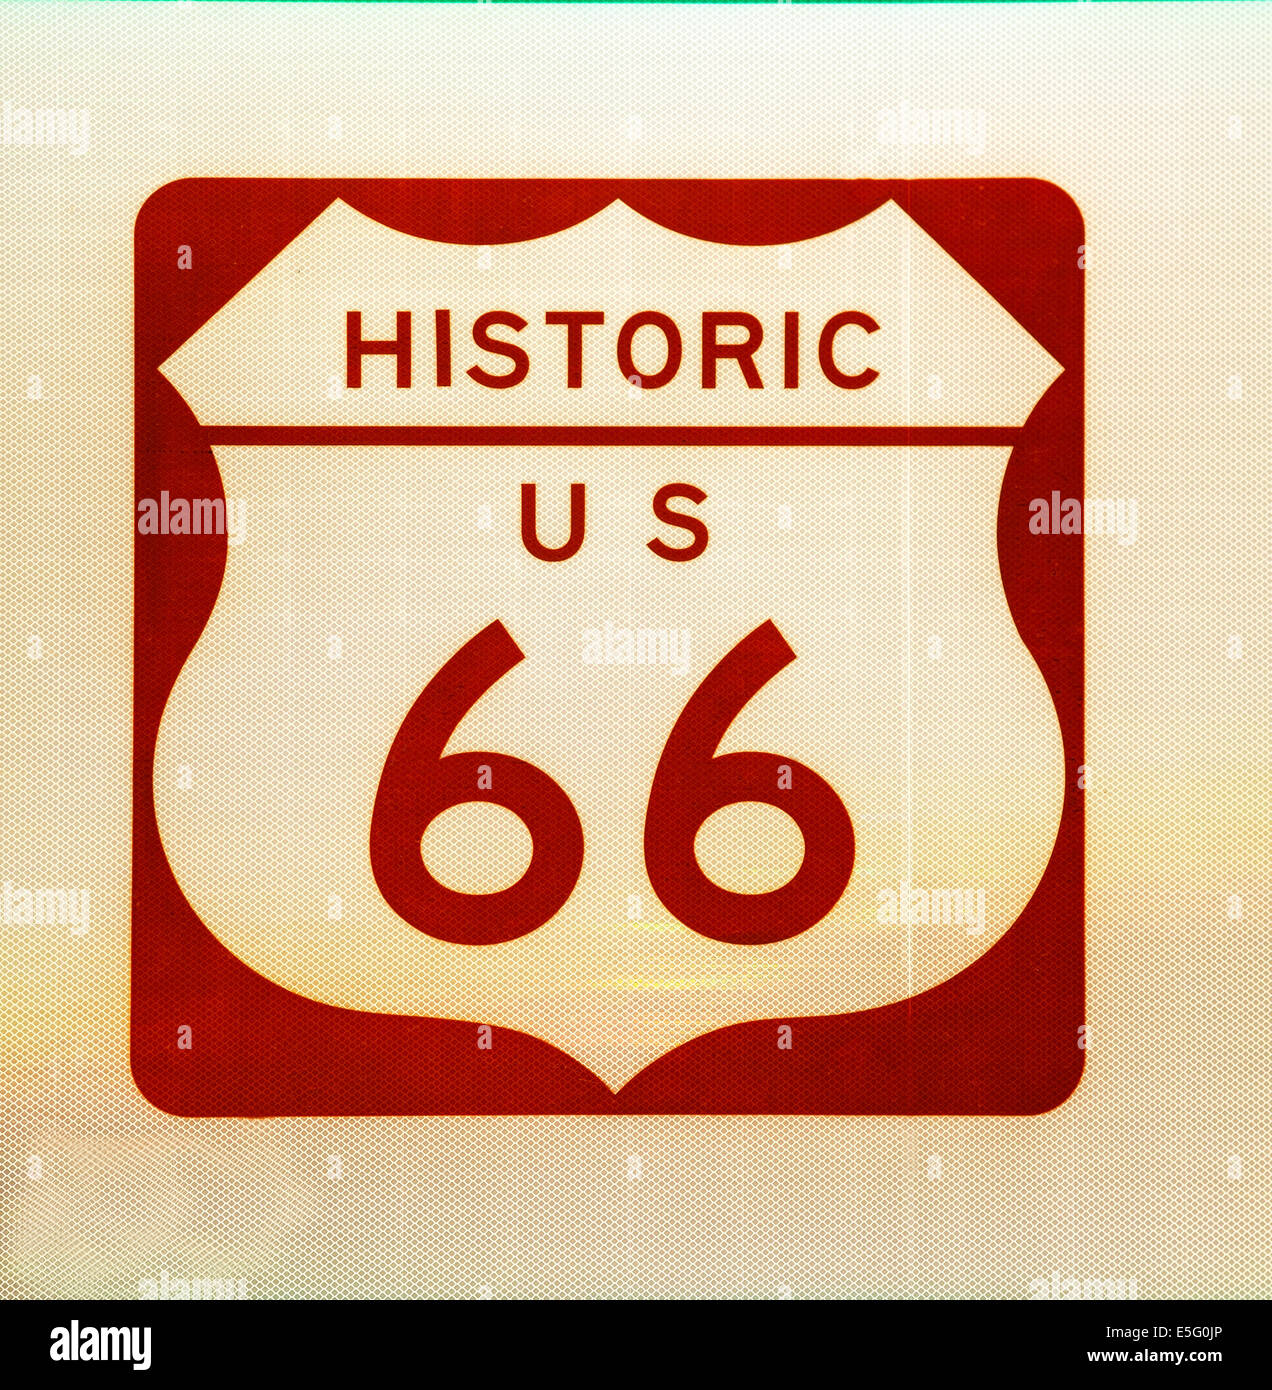 Historic US Route 66 vintage sign Stock Photo